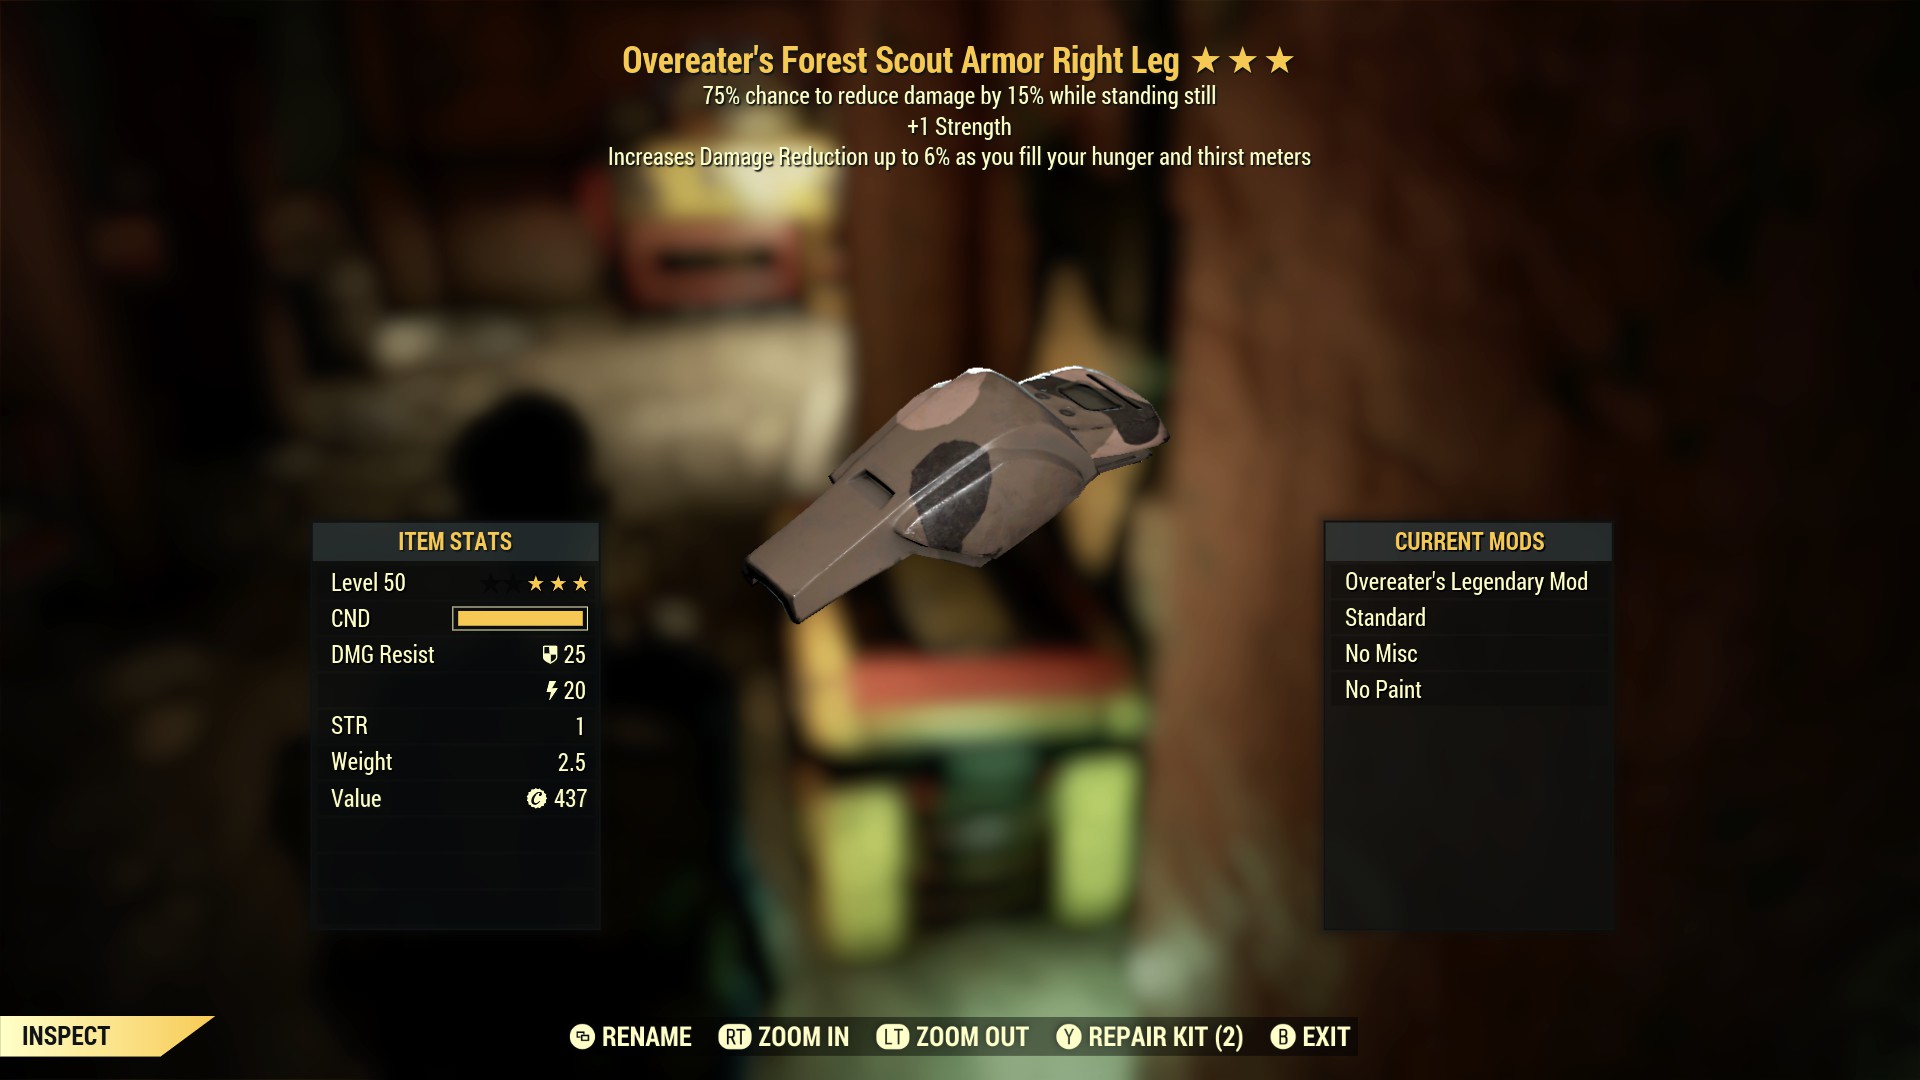 Overeater's Forest Scout Armor Right Leg